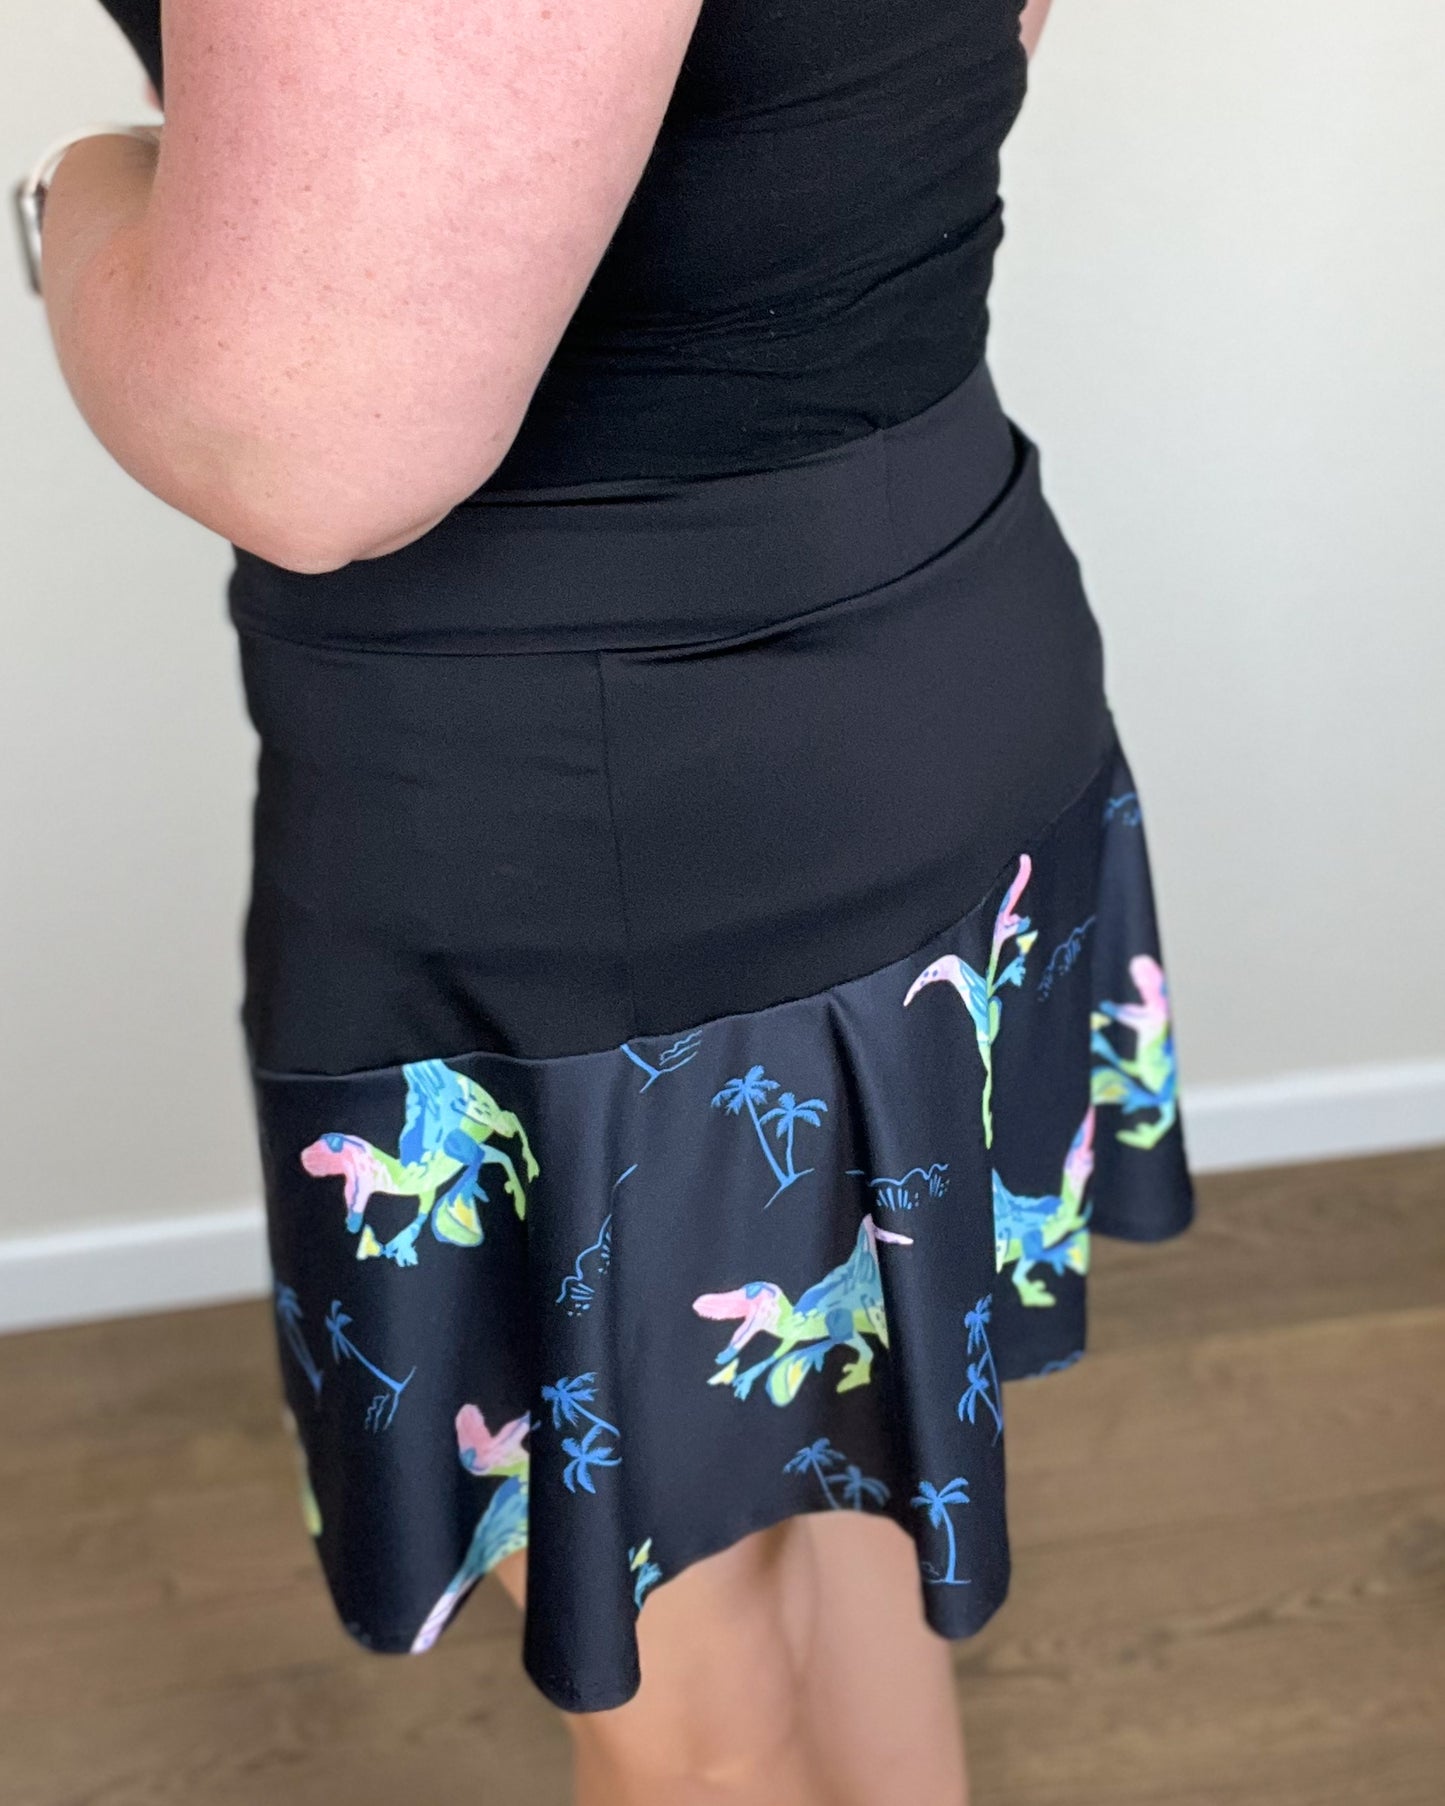 Dinos with Tacos and Margaritas - Flare Golf Skort